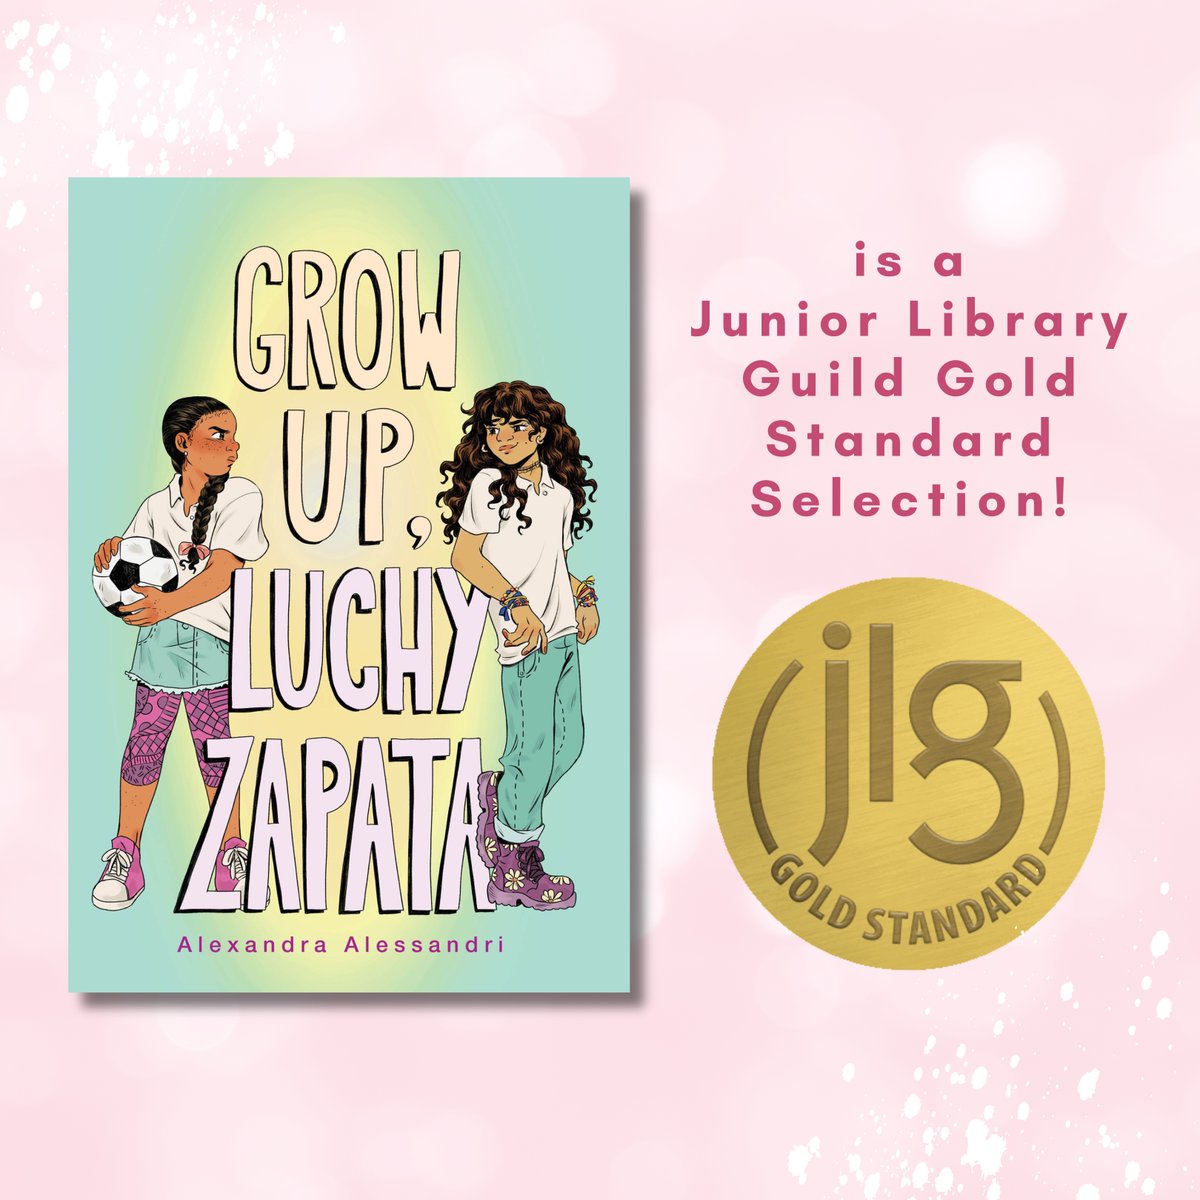 I just received the best news!! GROW UP, LUCHY ZAPATA is a @JrLibraryGuild Gold Standard Selection!! Thank you so much, JLG!! GROW UP, LUCHY ZAPATA arrives 7.23.24 from @SimonKIDS! More here: bit.ly/3tAsFU1 Ccover by @rosebousamra & design by Debra Sfeitsos-Conover.